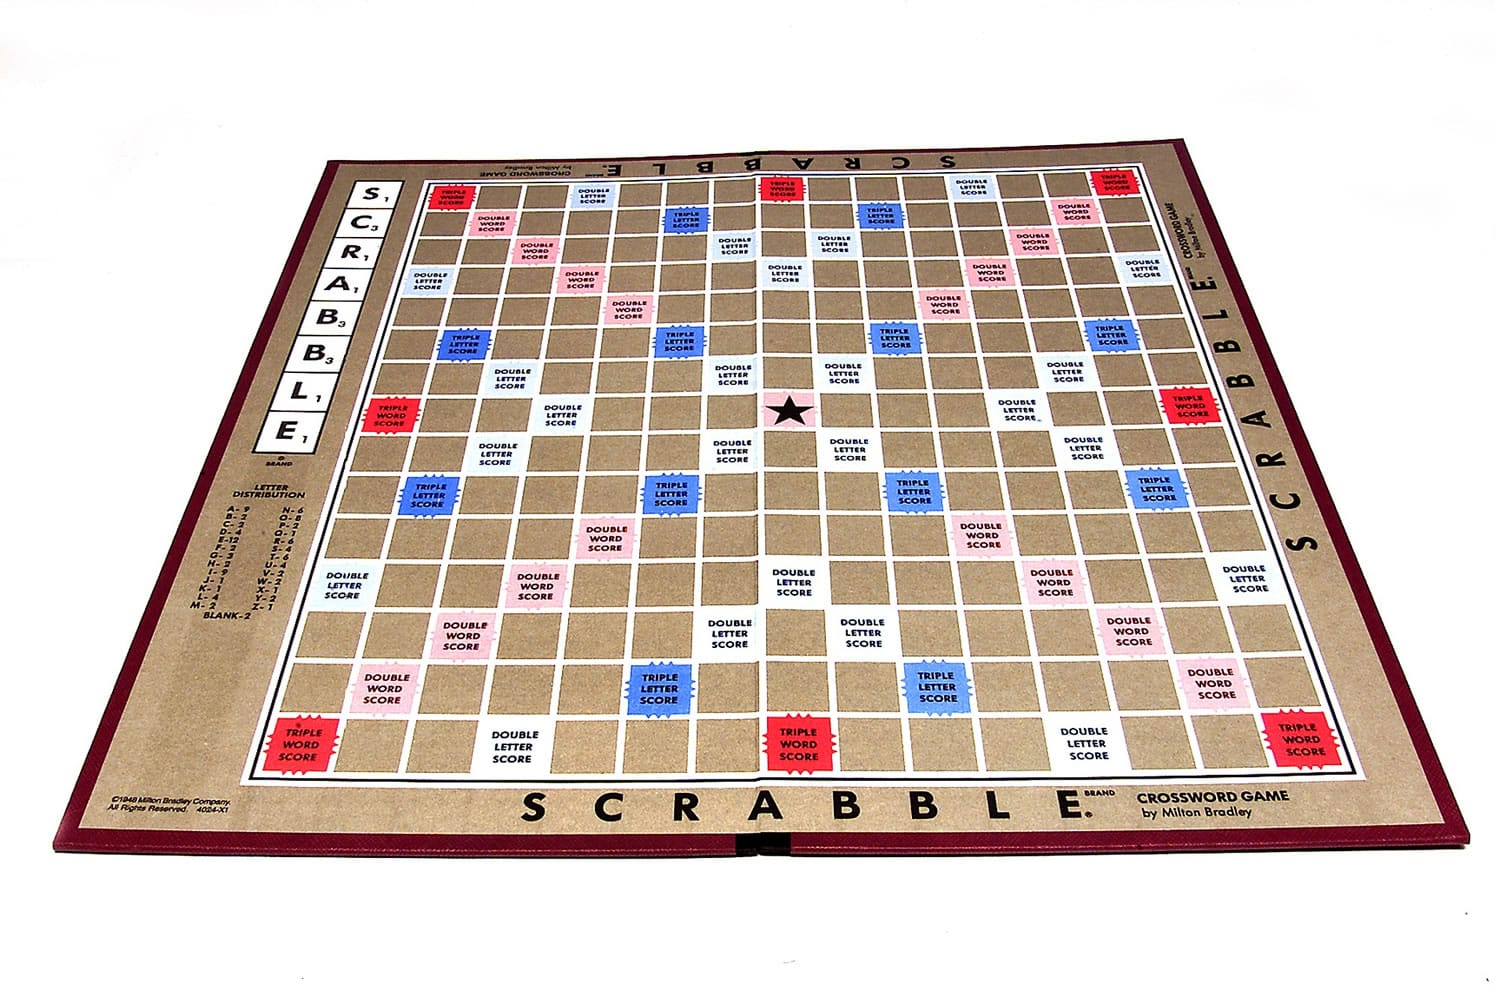 Calling all Scrabble fans, Scrabble With a Cause will be hosting a fundraising tournament on March 21